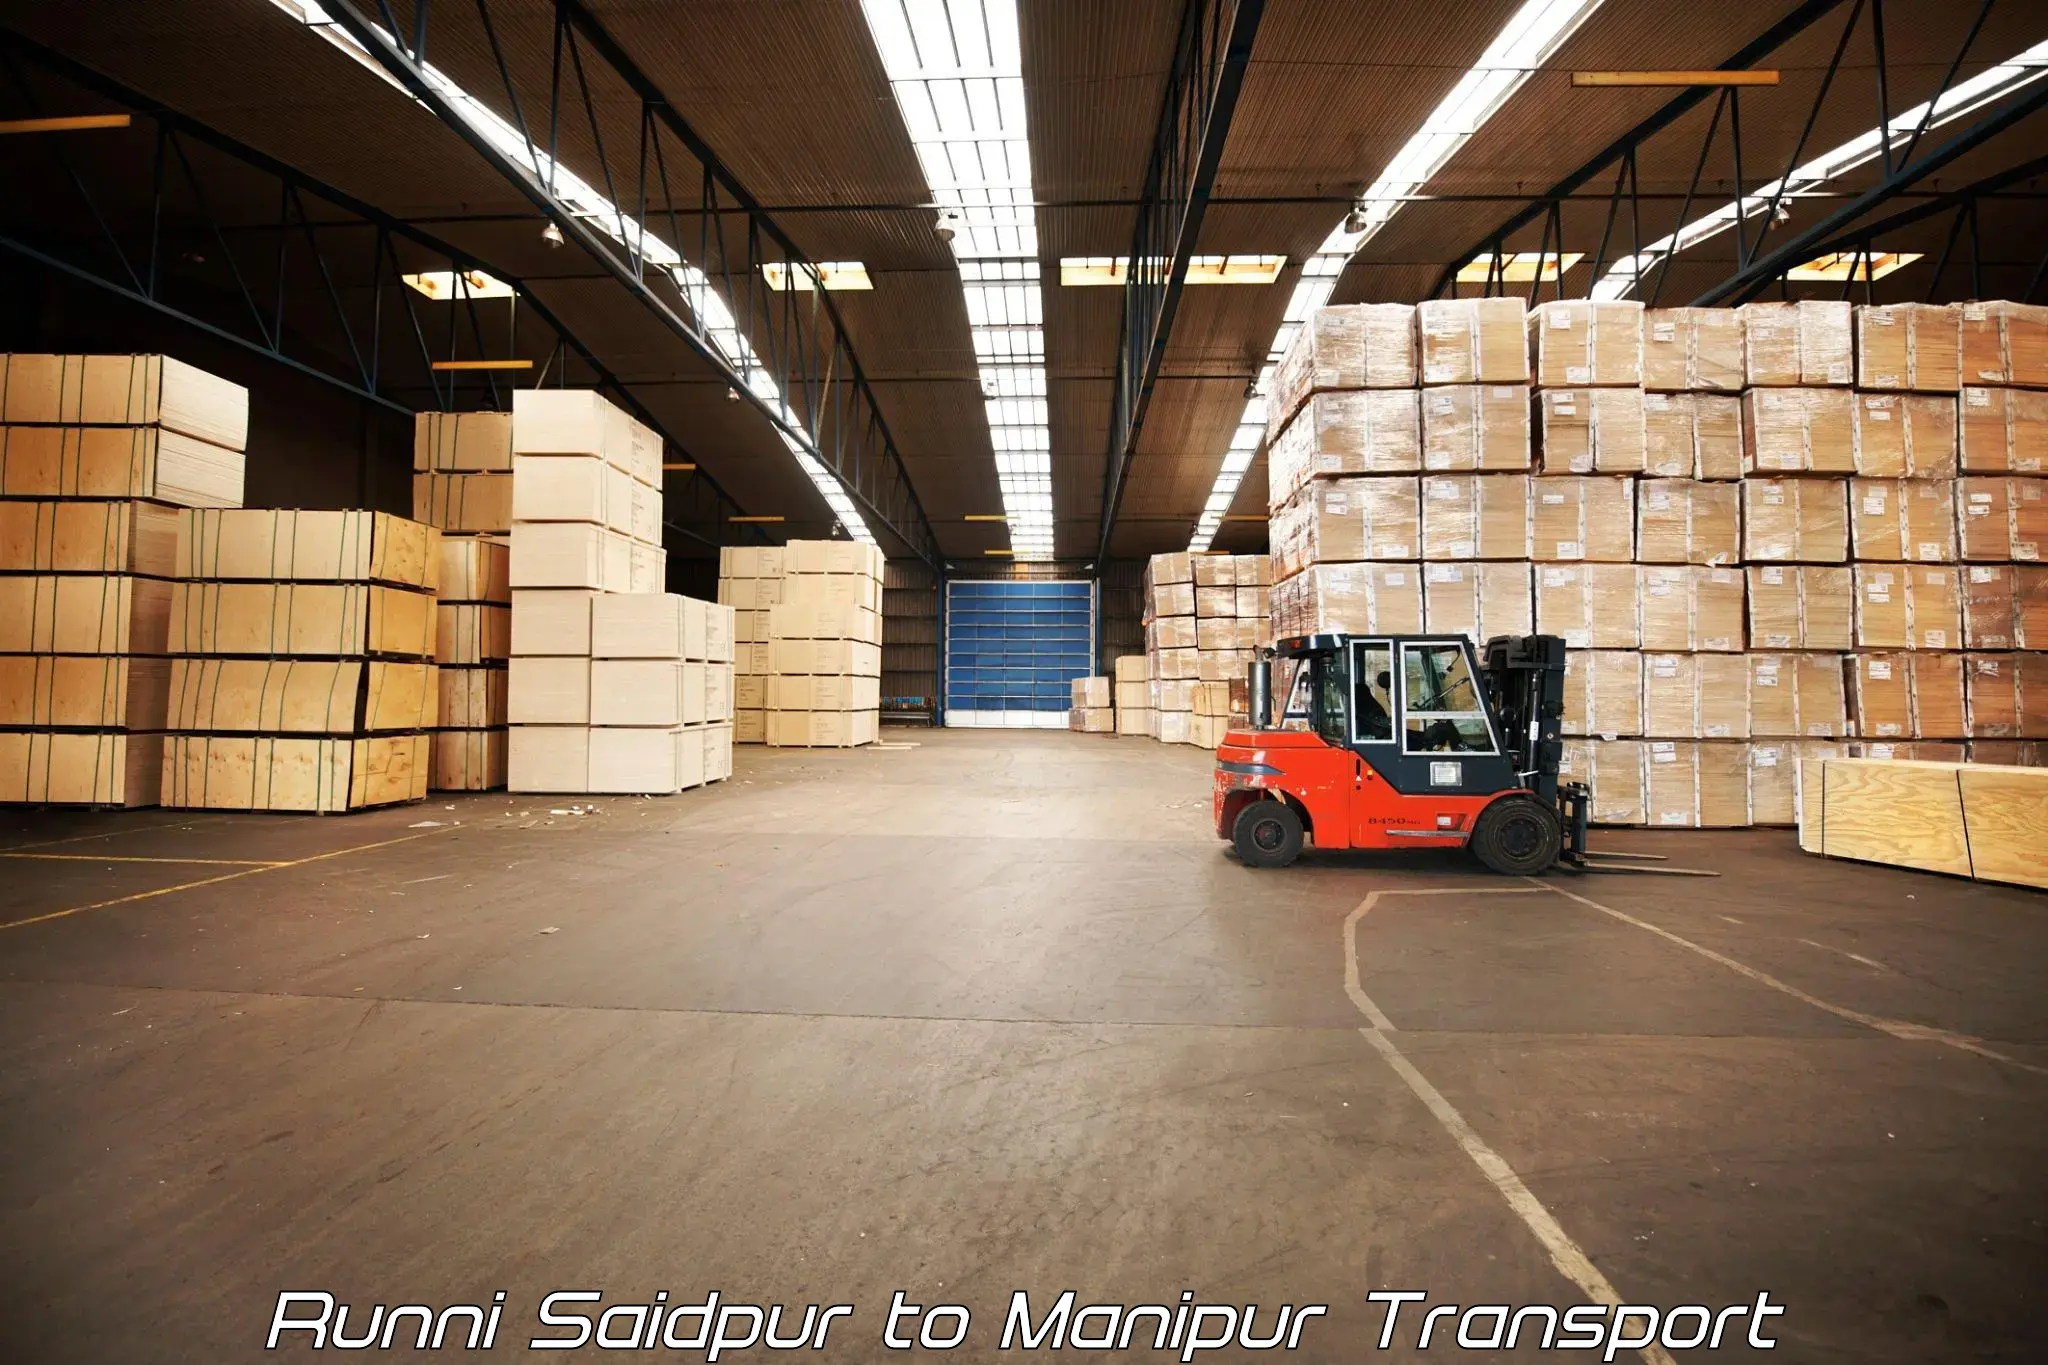 Daily parcel service transport Runni Saidpur to Manipur